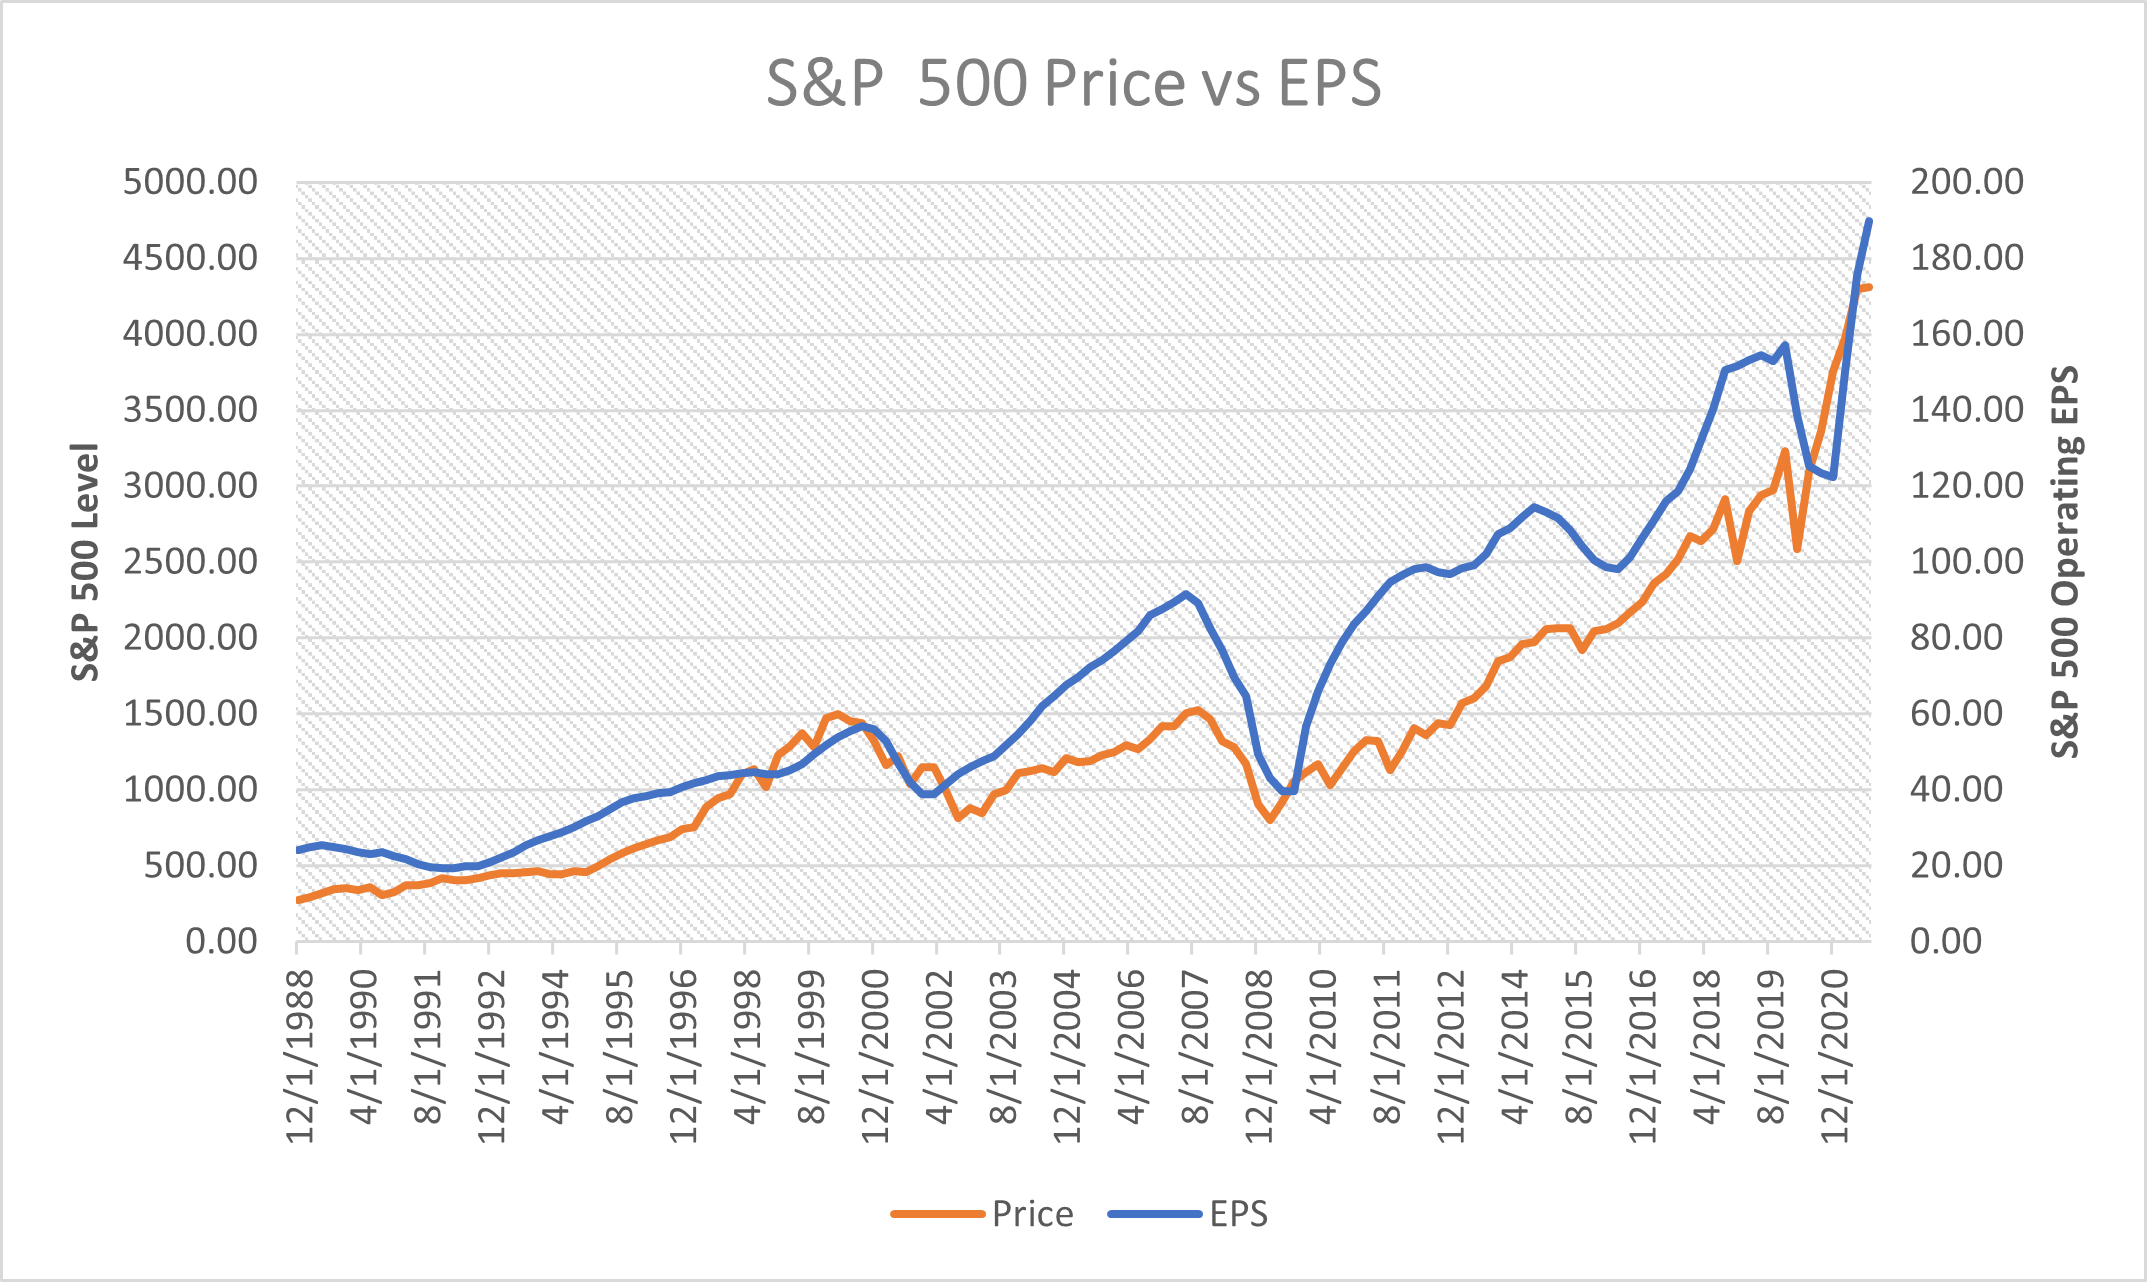 Chart detailing the divergence of the S&P 500 vs earnings per share